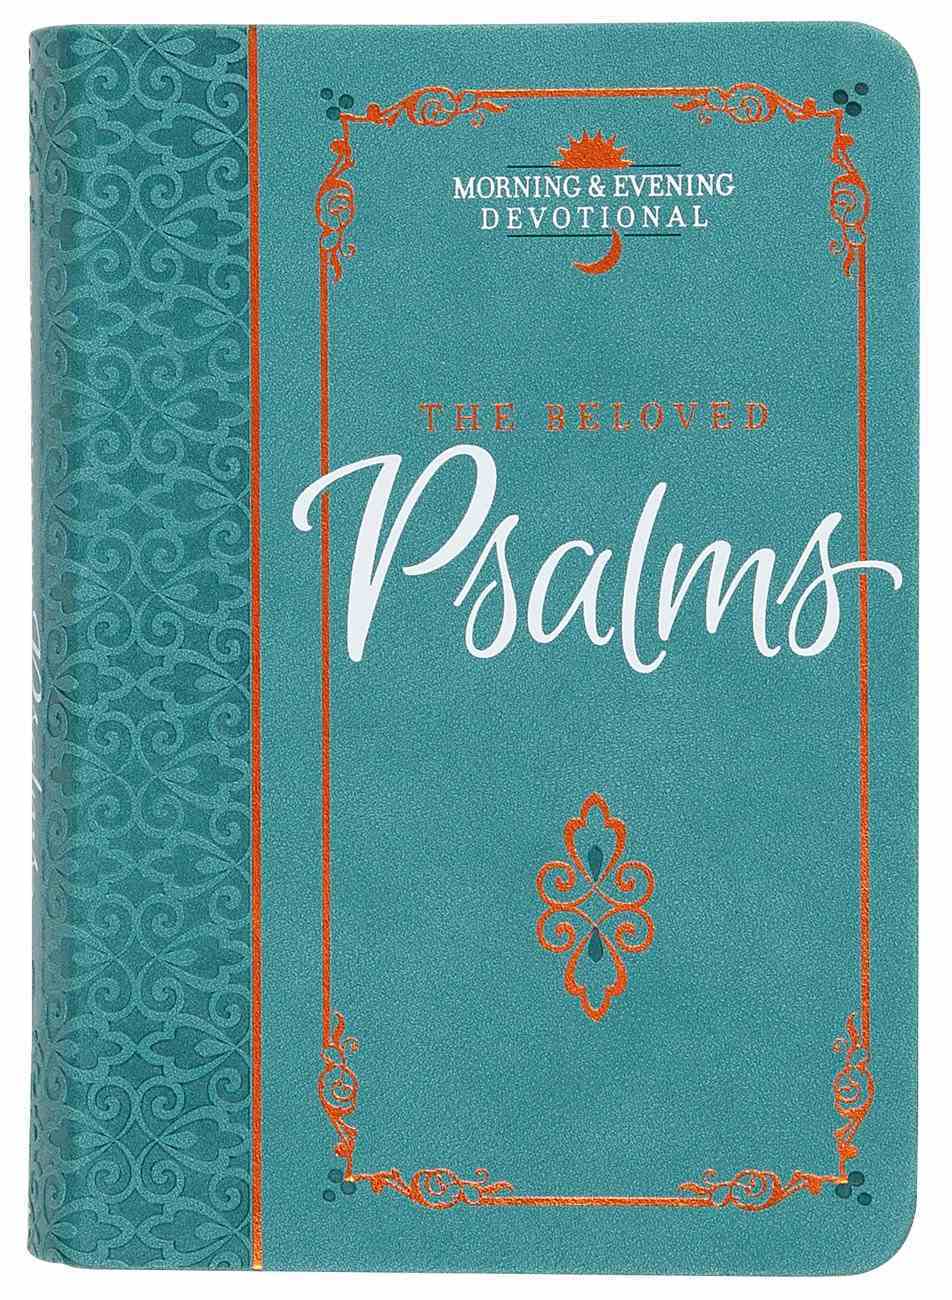 The Beloved Psalms: Morning and Evening Devotional Imitation Leather